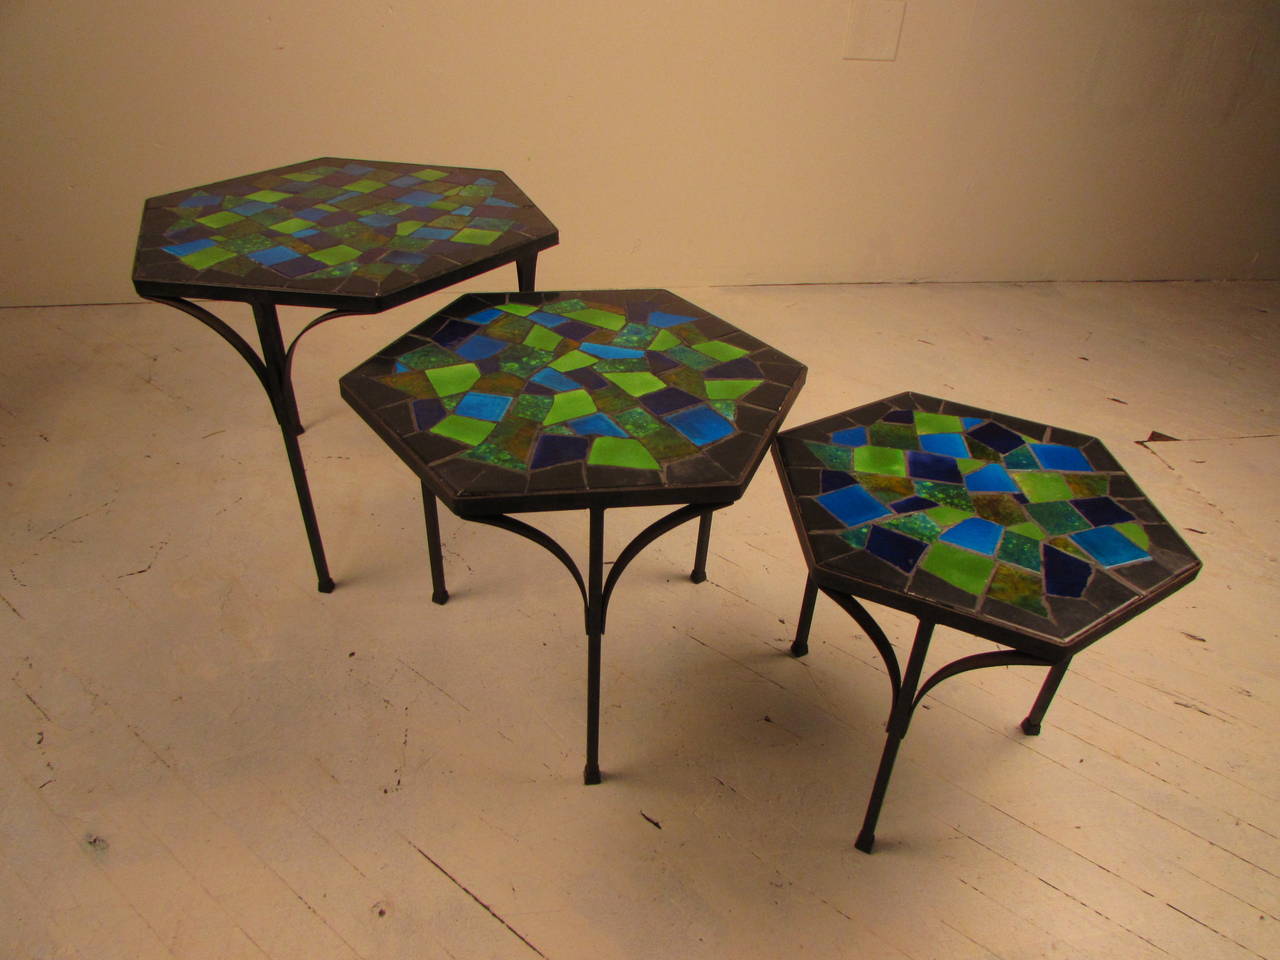 Set of three hexagonal nesting tables by mosaic artist Jon Matin. Tables have inset multicolored mosaic tiles set into an iron base. Incredible, vibrant color and charming forms. Overall very good vintage condition with some minor grout losses.